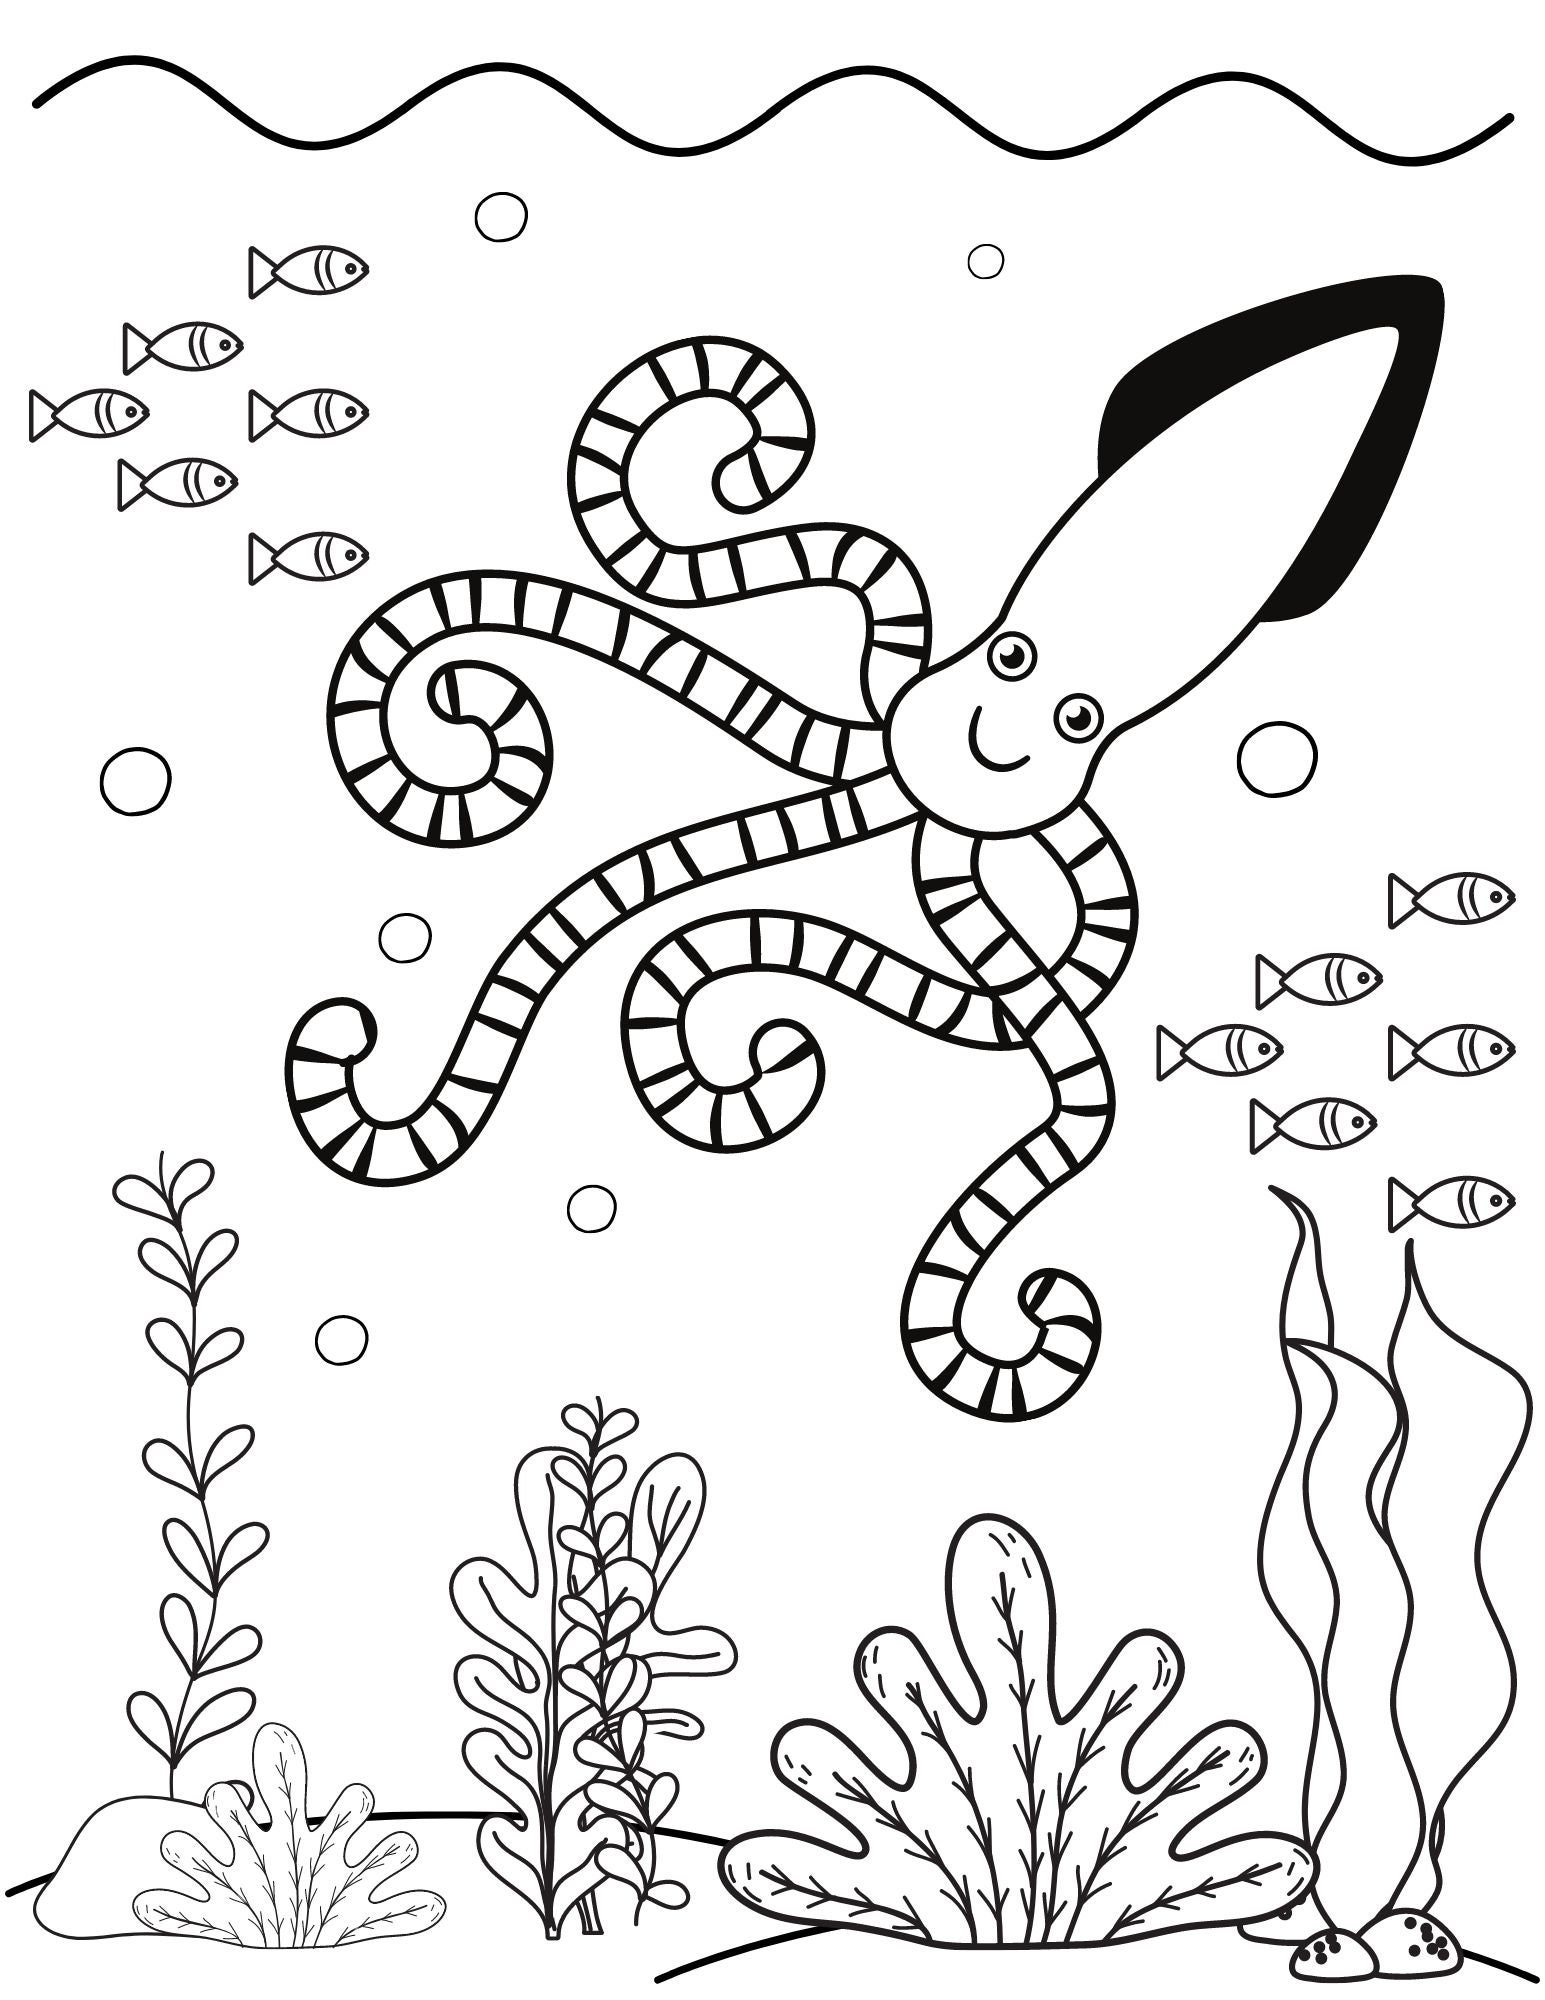 35-under-the-sea-coloring-pages-sea-life-coloring-ocean-etsy